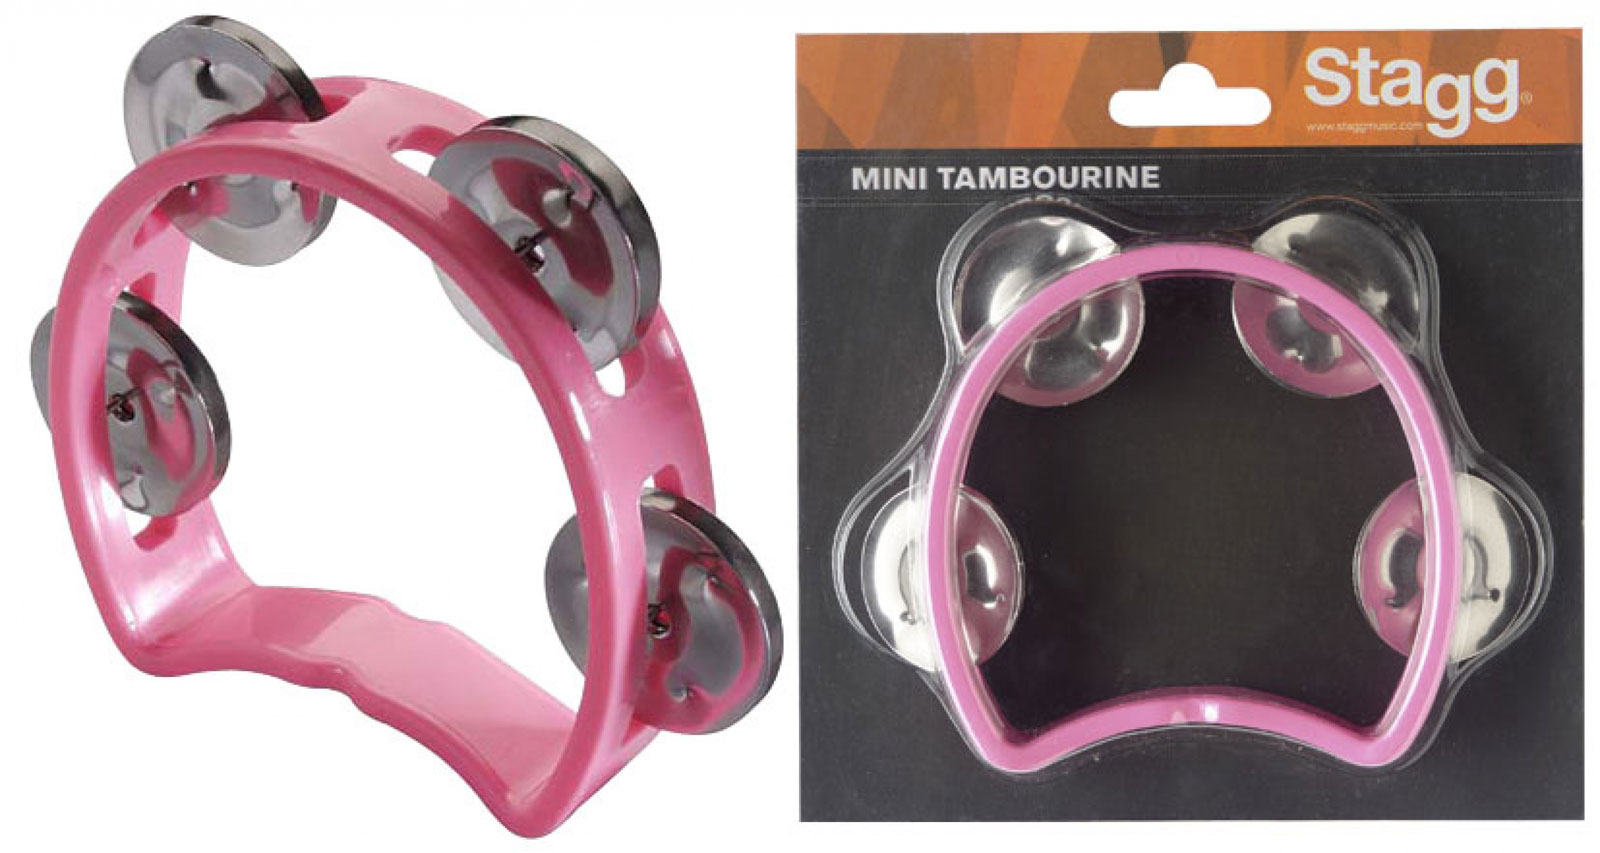 STAGG MINI TAMBOURIN 4 CYMBALETTES PLASTIQUE ROSE